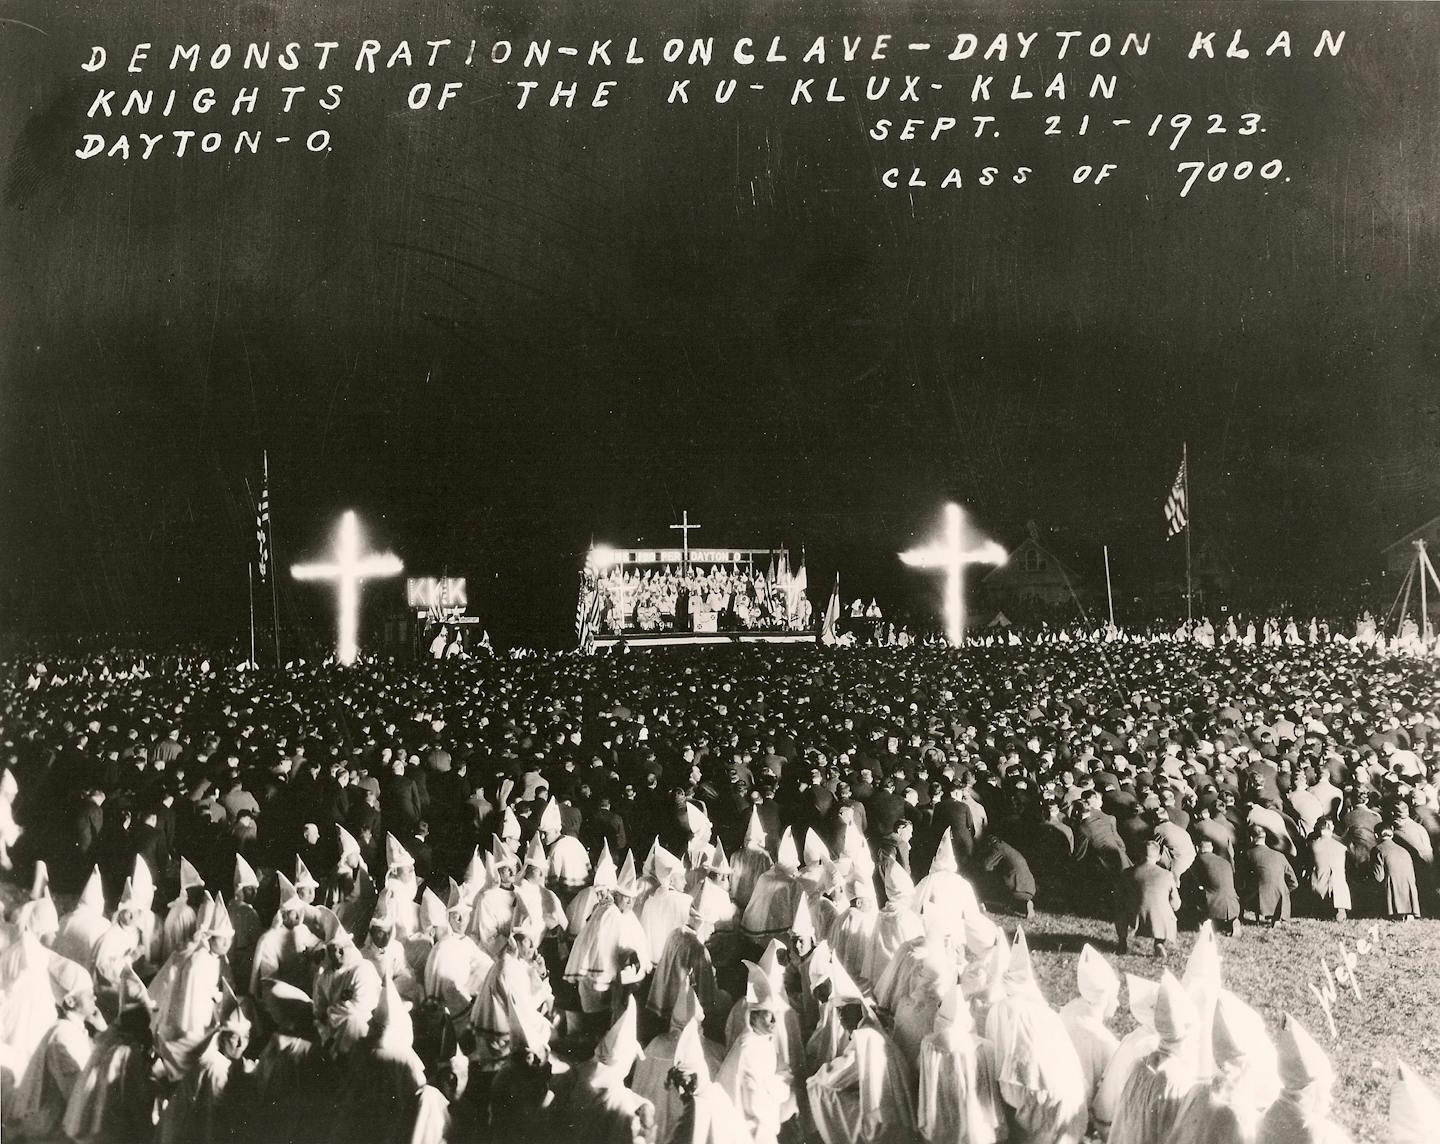 100 years ago, the KKK planted bombs at a US university – part of the terror group’s crusade against American Catholics